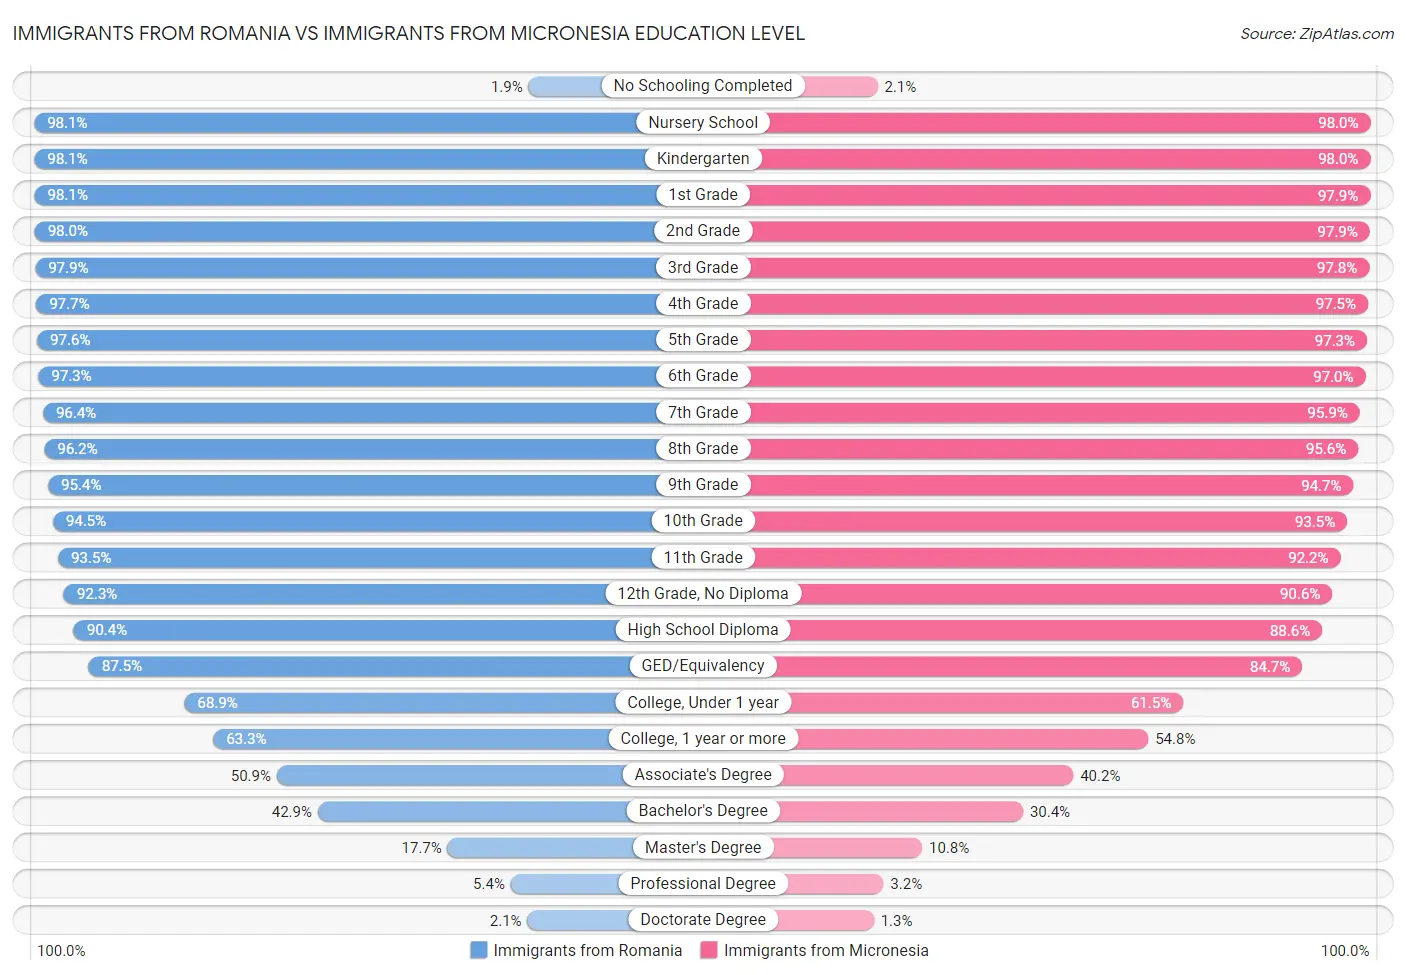 Immigrants from Romania vs Immigrants from Micronesia Education Level